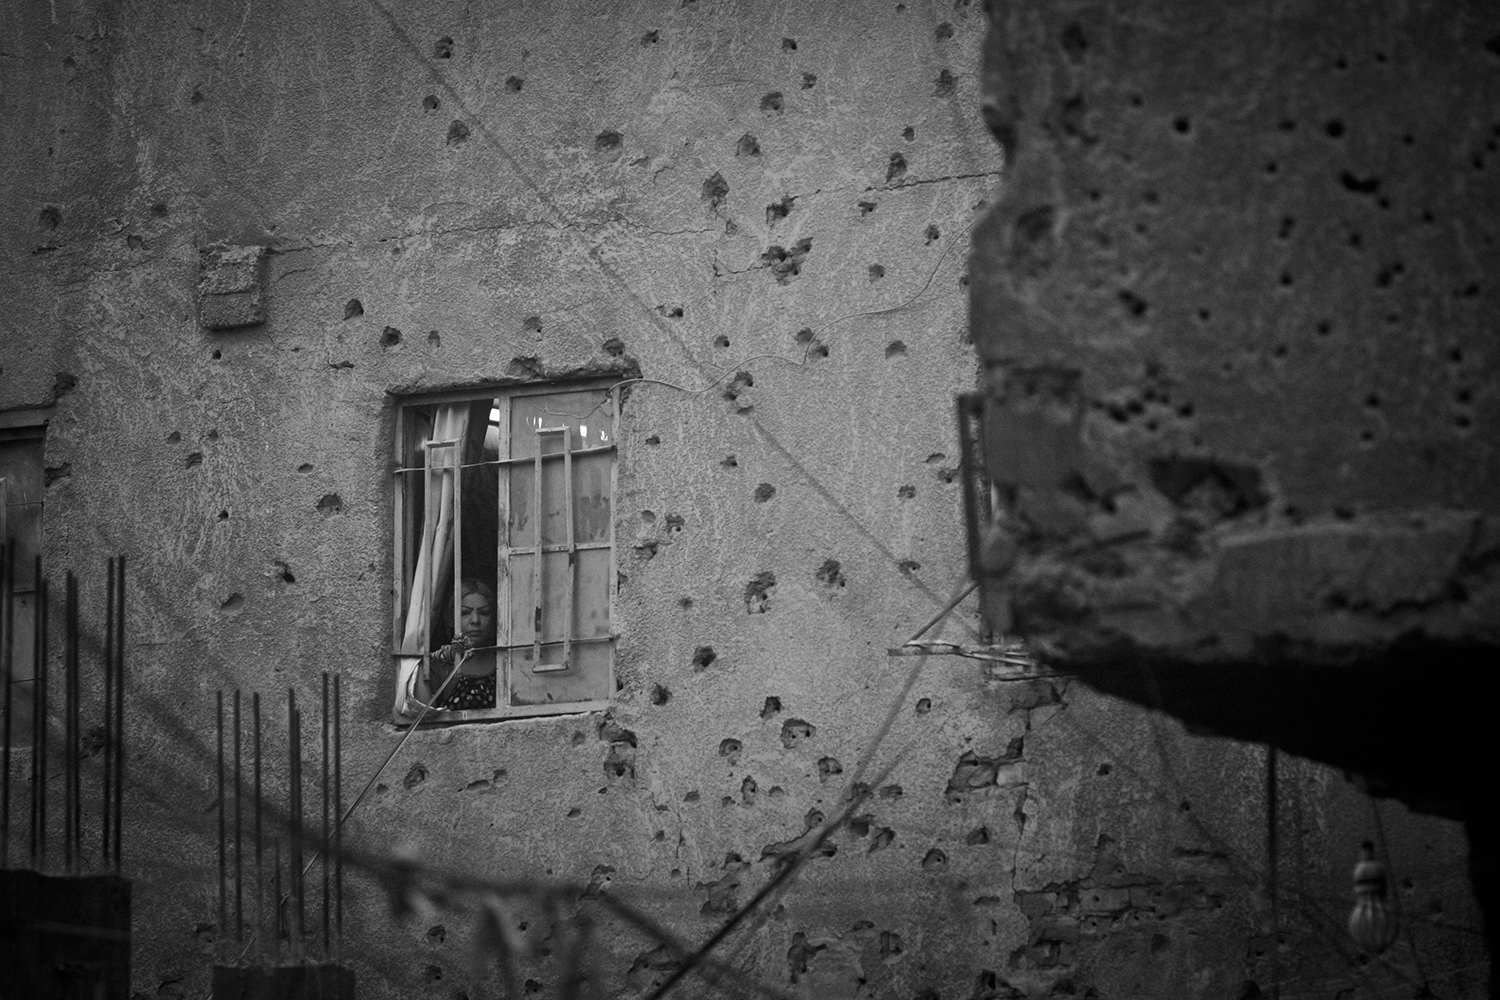 Apr. 19, 2012.  Hurriya District, Baghdad. A woman looks out the window of her house riddled with bullet holes.